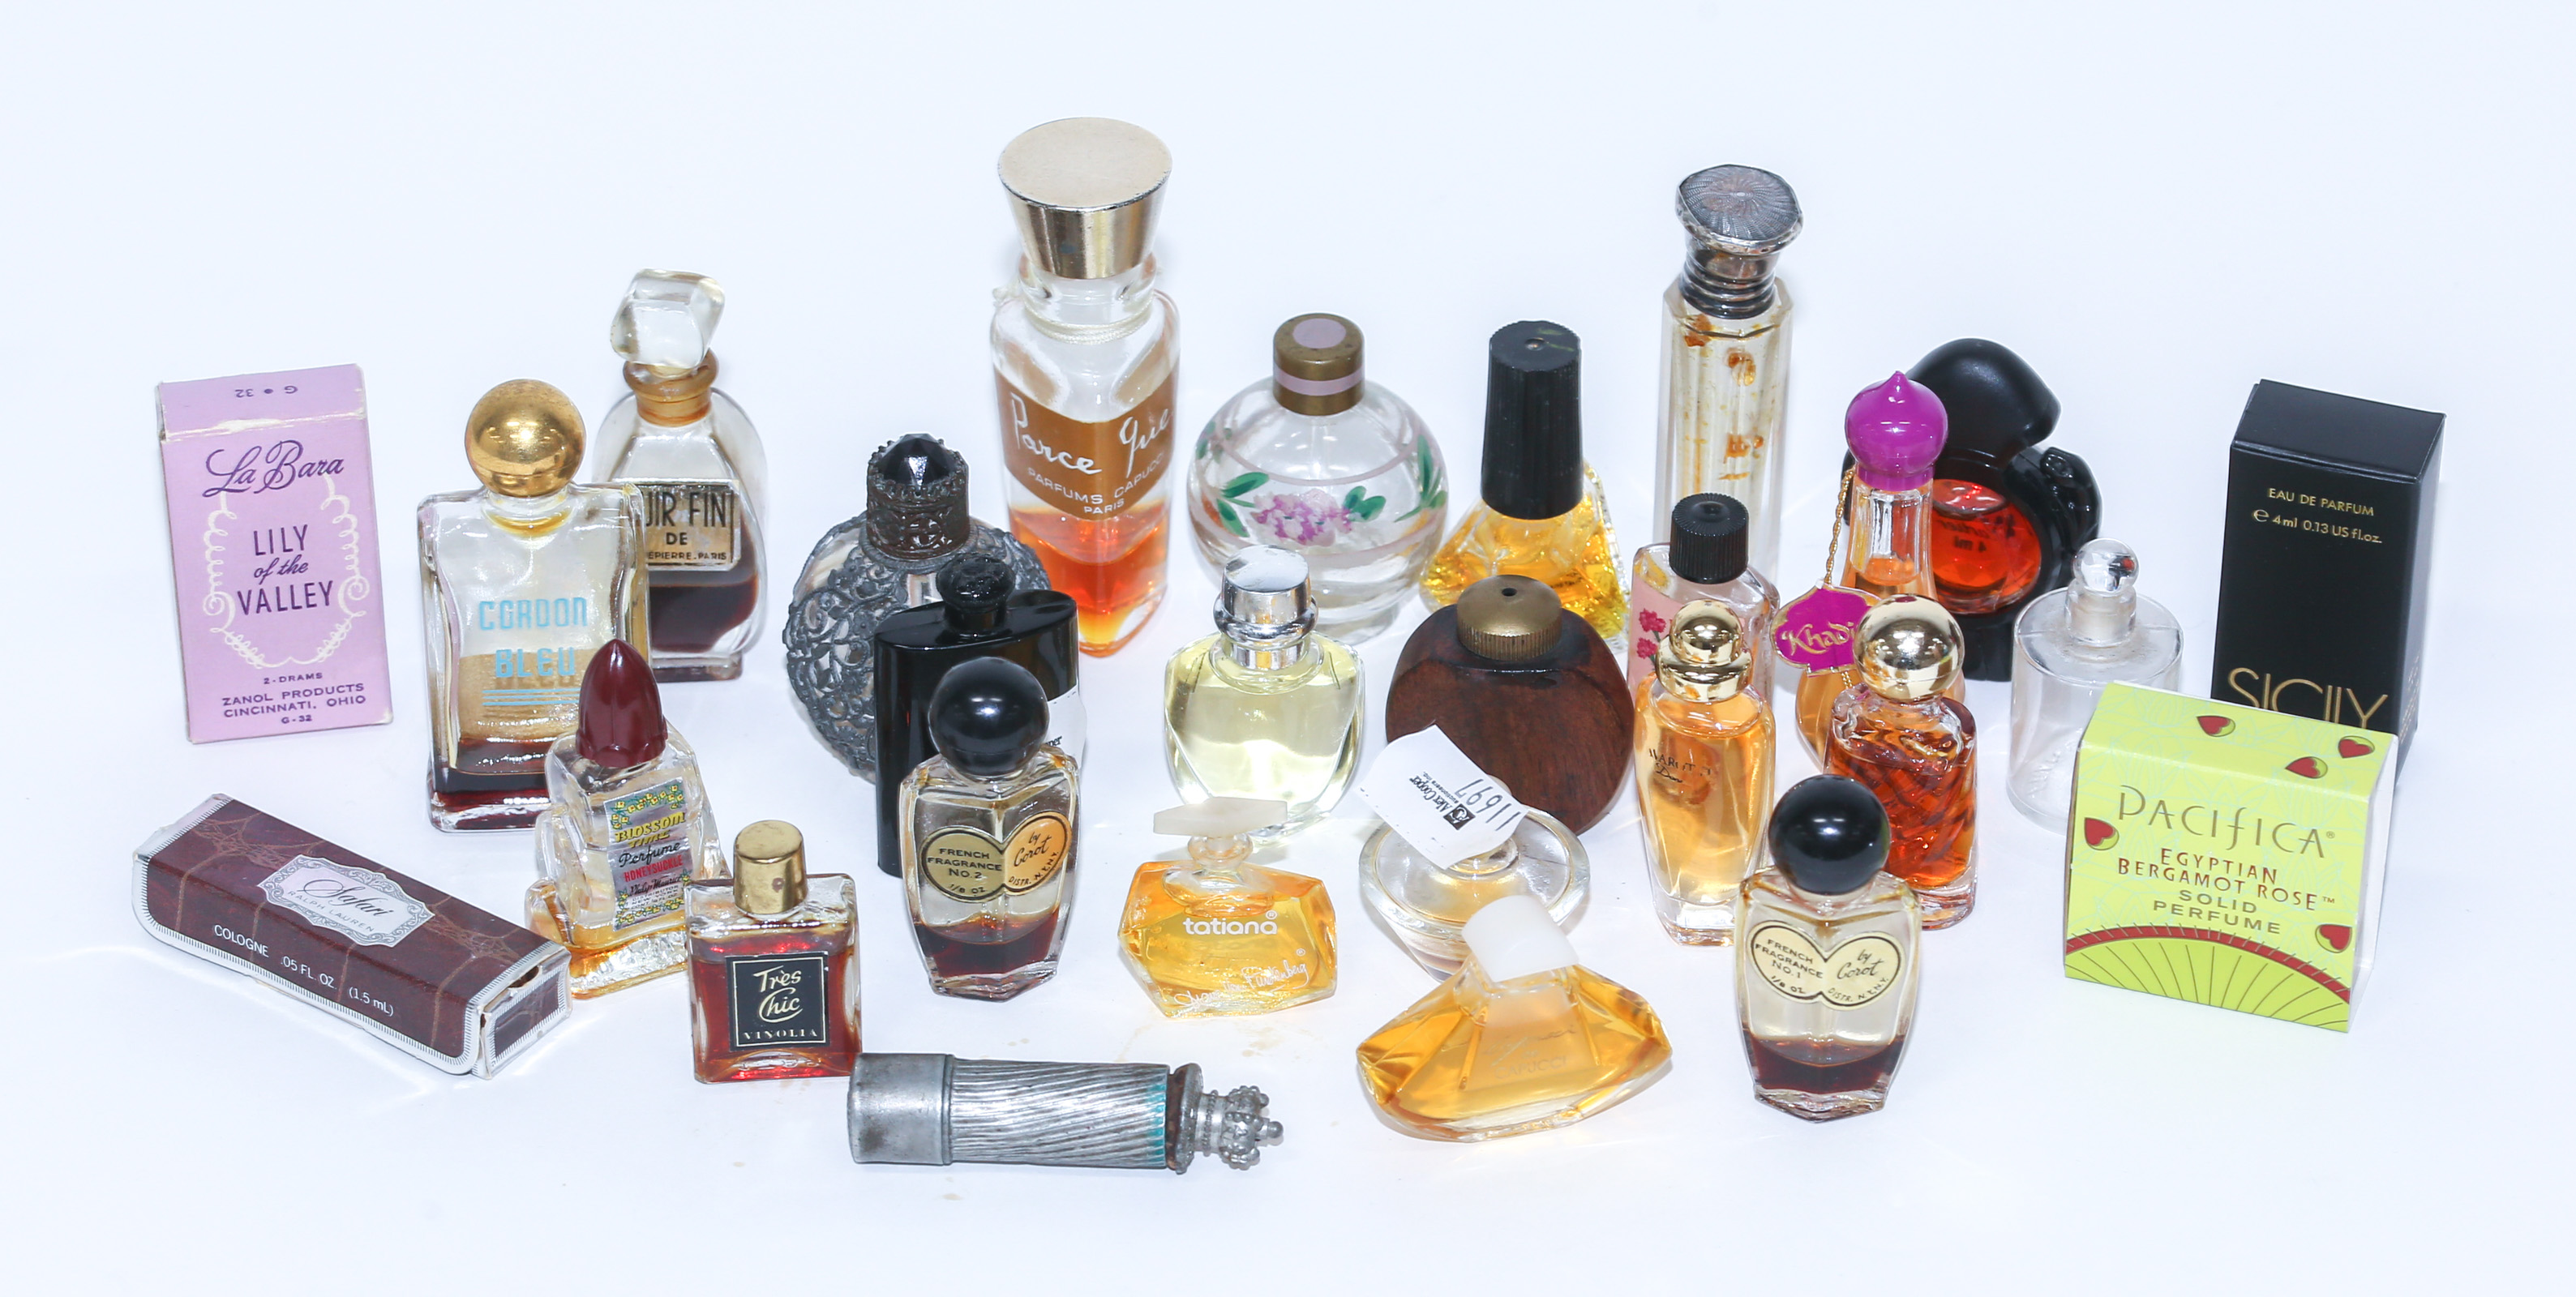 A LARGE ASSORTMENT OF PERFUME BOTTLES